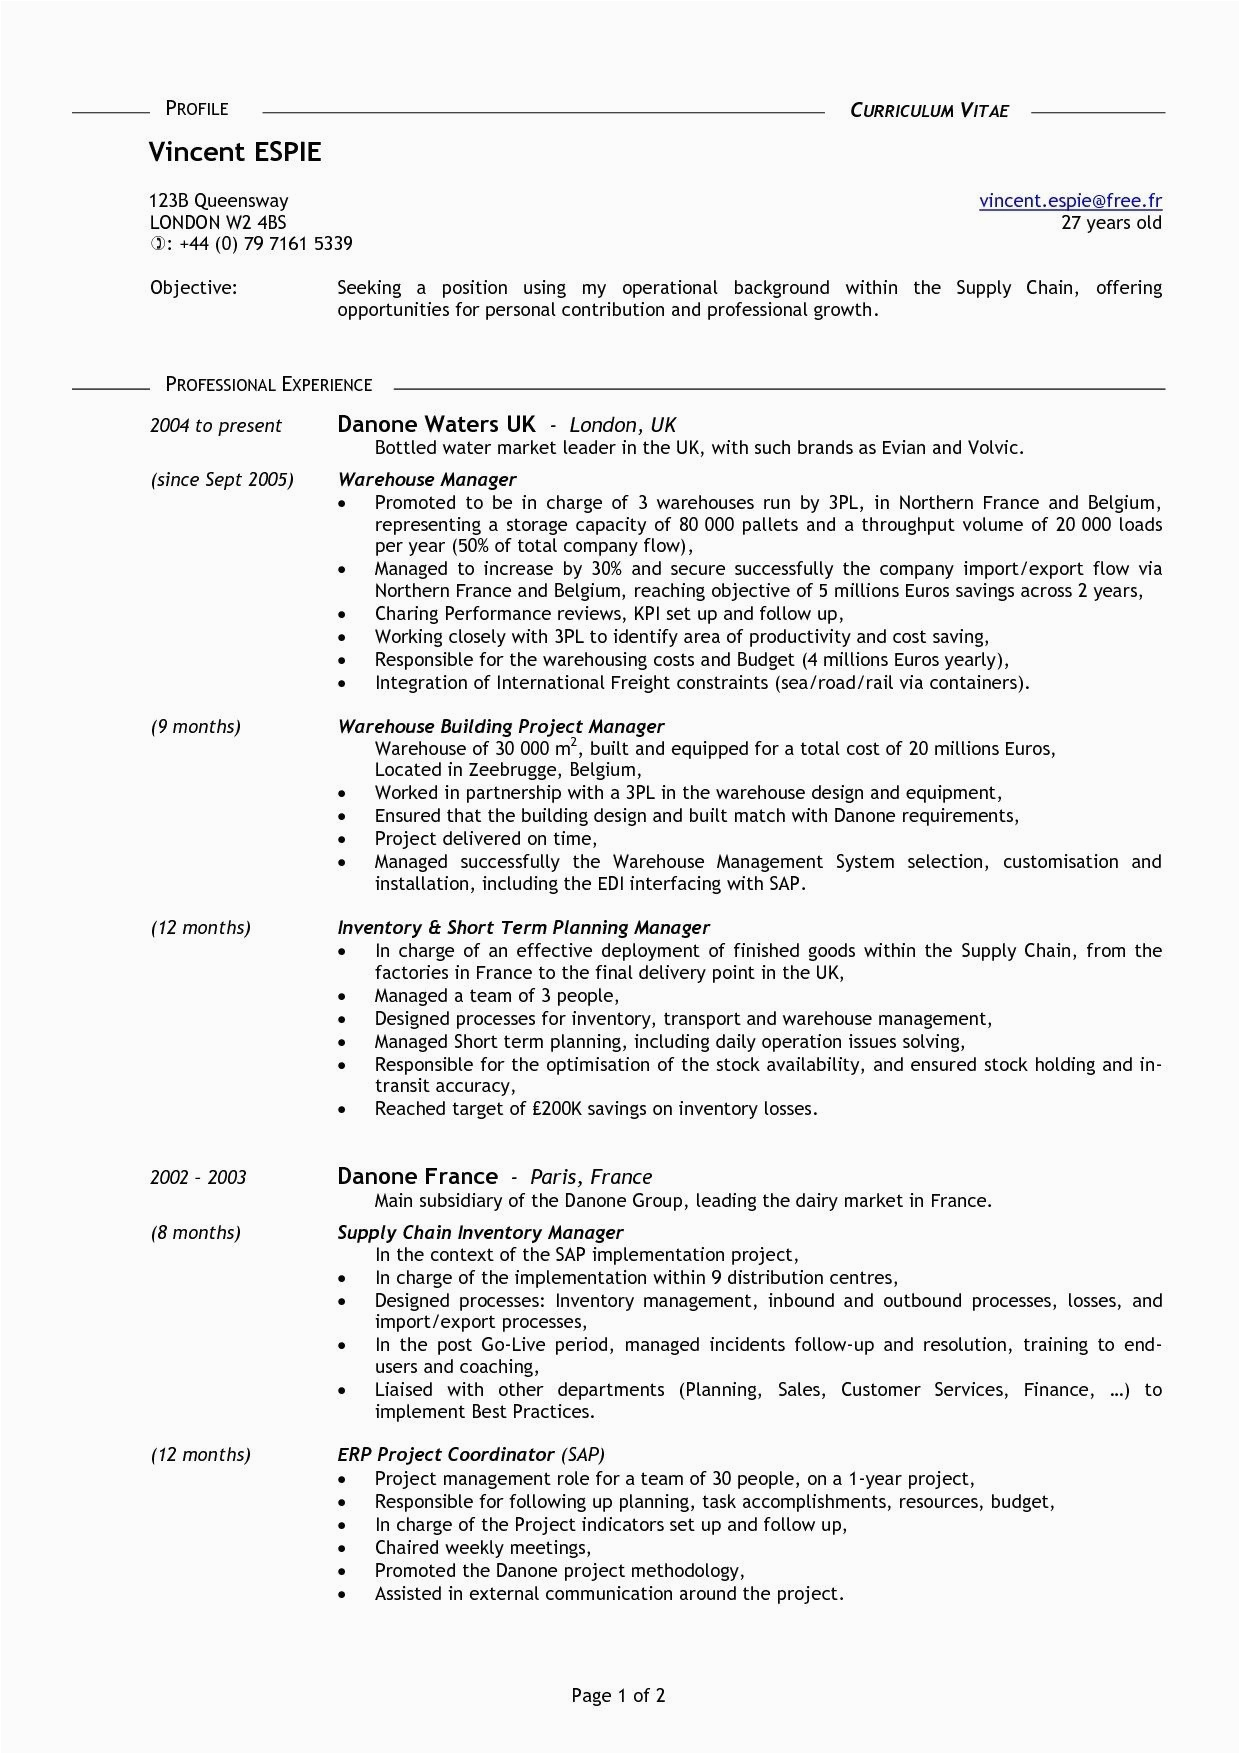 Resume Samples for A 16 Year Old Resume Templates for 16 Year Olds Cv for 16 Year Olds